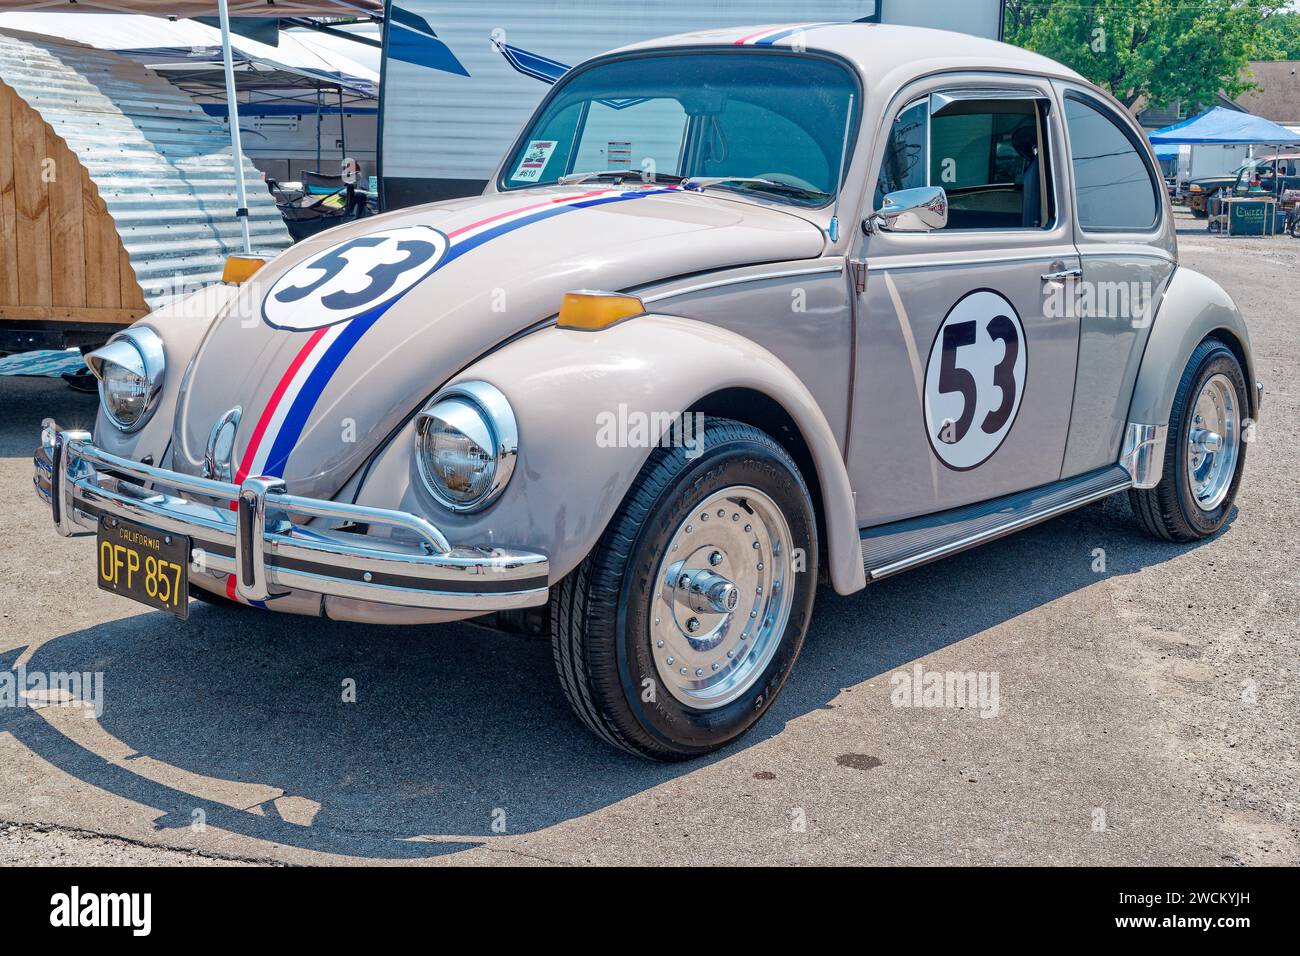 Iconic movie star form the late 1960's Herbie the love bug this one is a restored Volkswagen beetle look a like at a car show closeup front to side vi Stock Photo